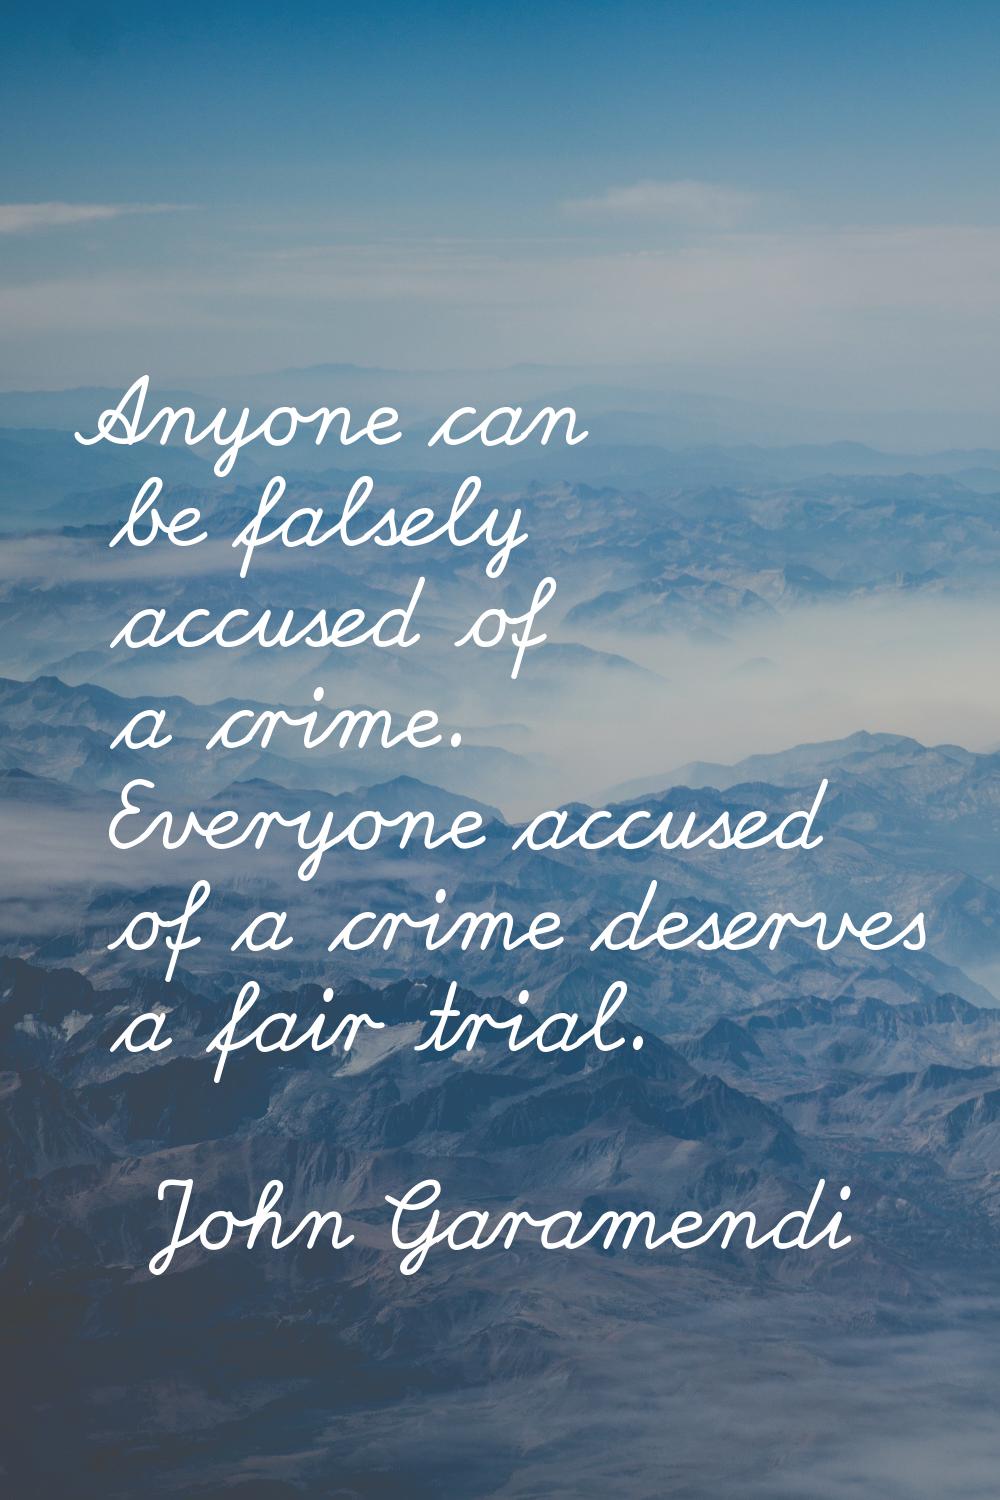 Anyone can be falsely accused of a crime. Everyone accused of a crime deserves a fair trial.